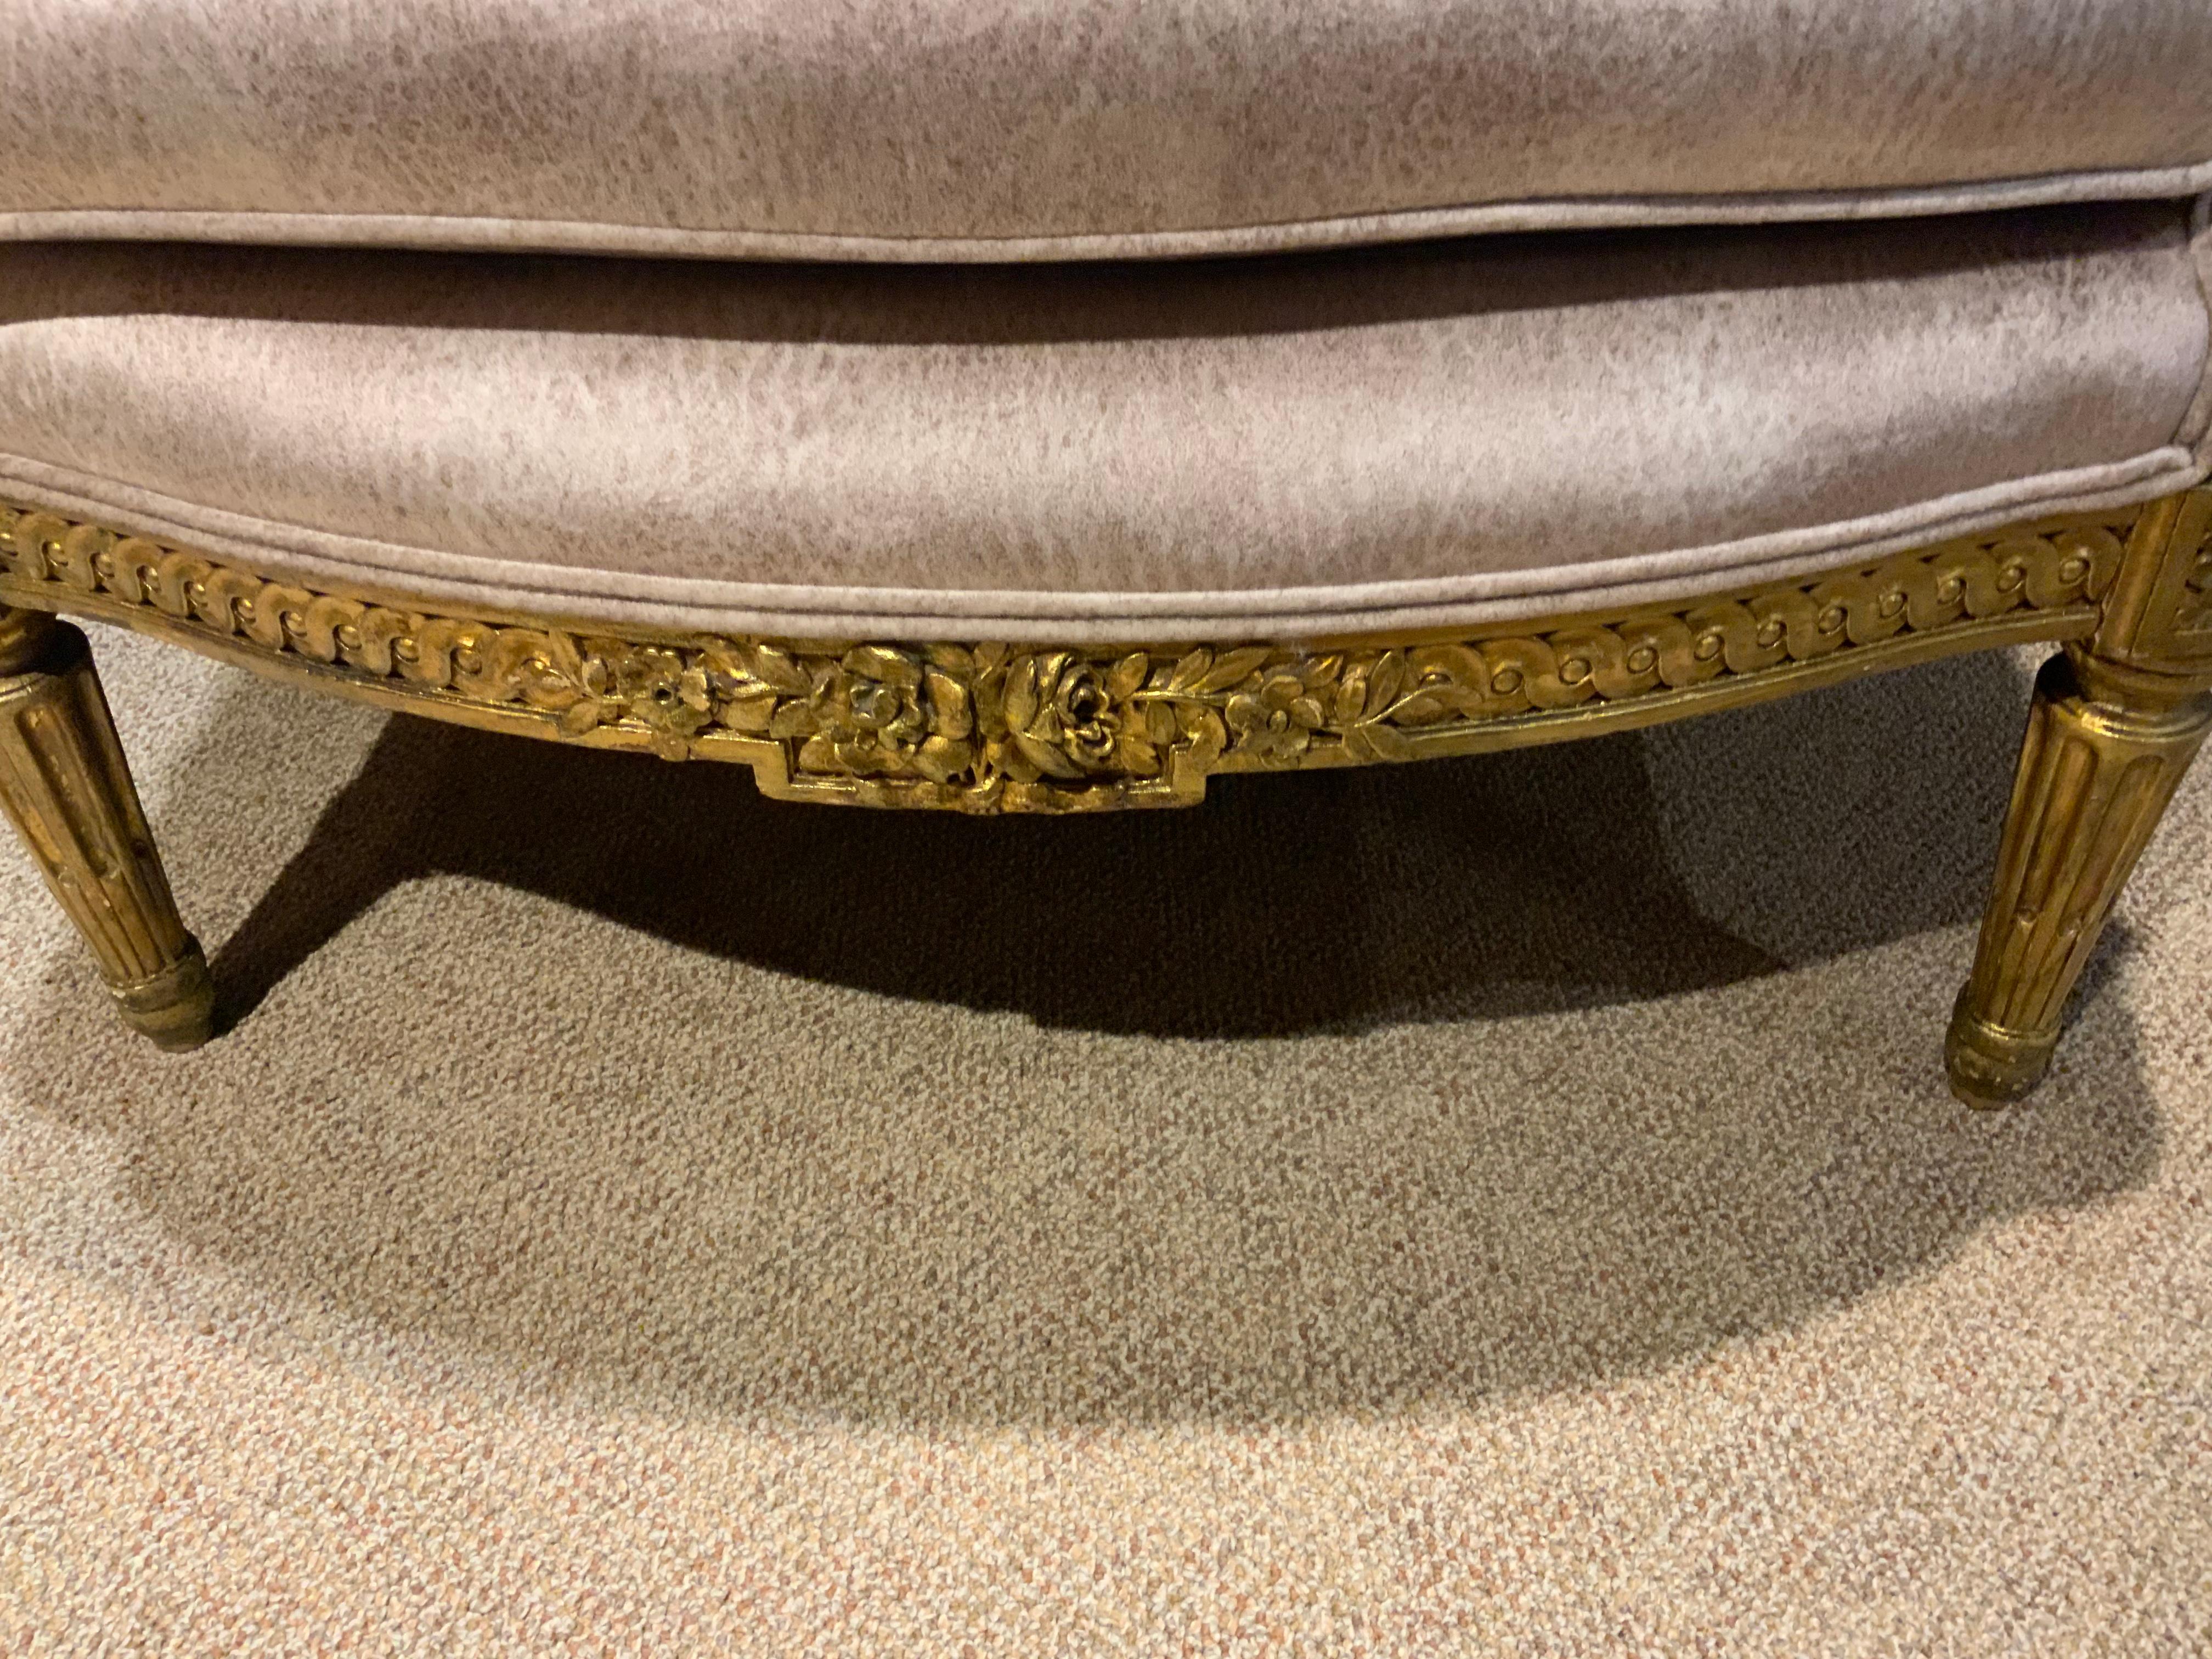 This bergere chair from France has exquisite style and
Form. It is very comfortable due to the shape of the
back and the seat. The curve of the back is very 
Pleasing. The gilding is a light gold original hue
And the patina is pleasing. The